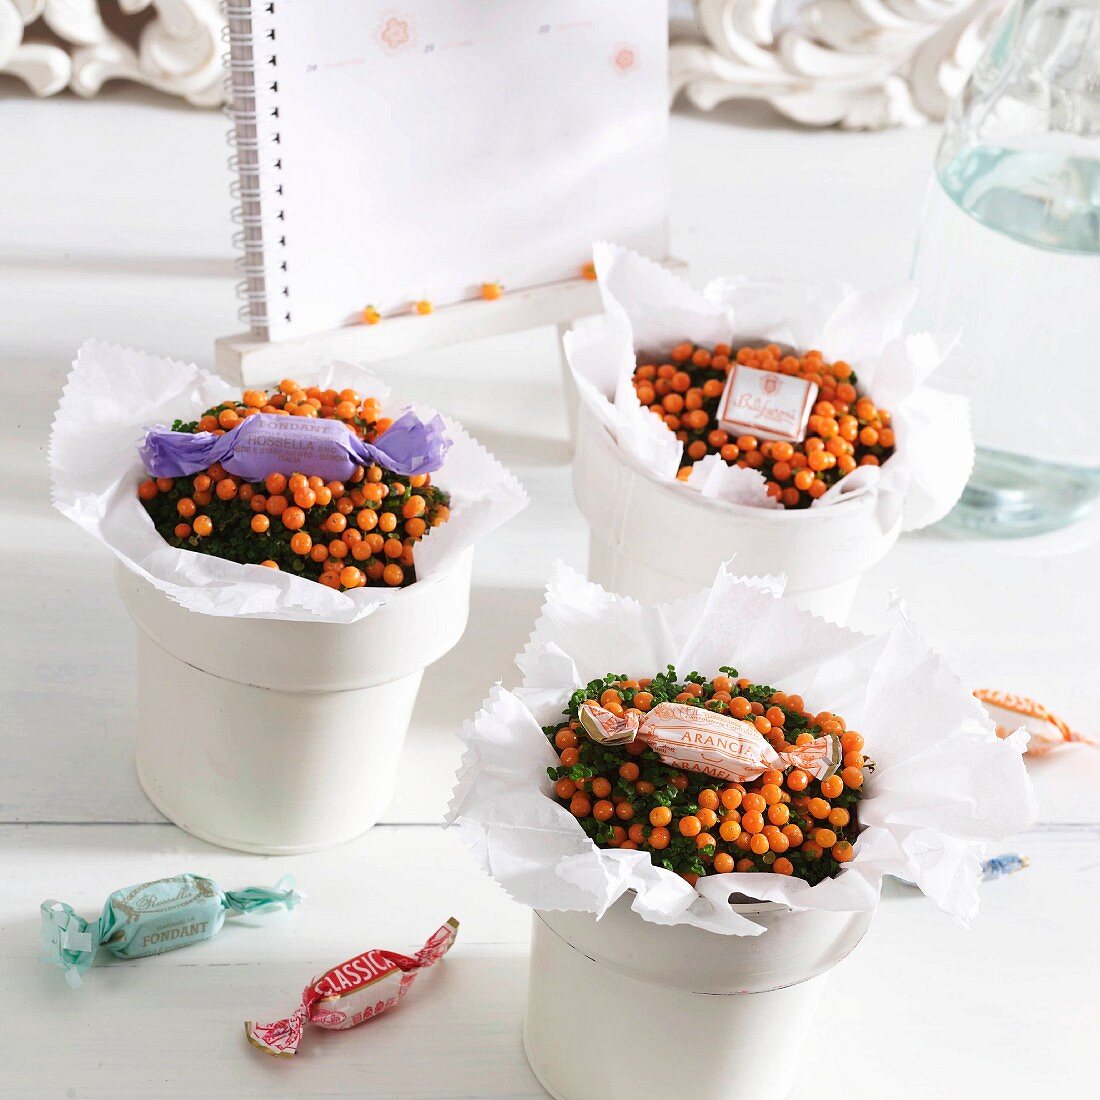 Small gifts or table decorations; potted coral bead plants wrapped in white tissue paper and decorated with wrapped sweets